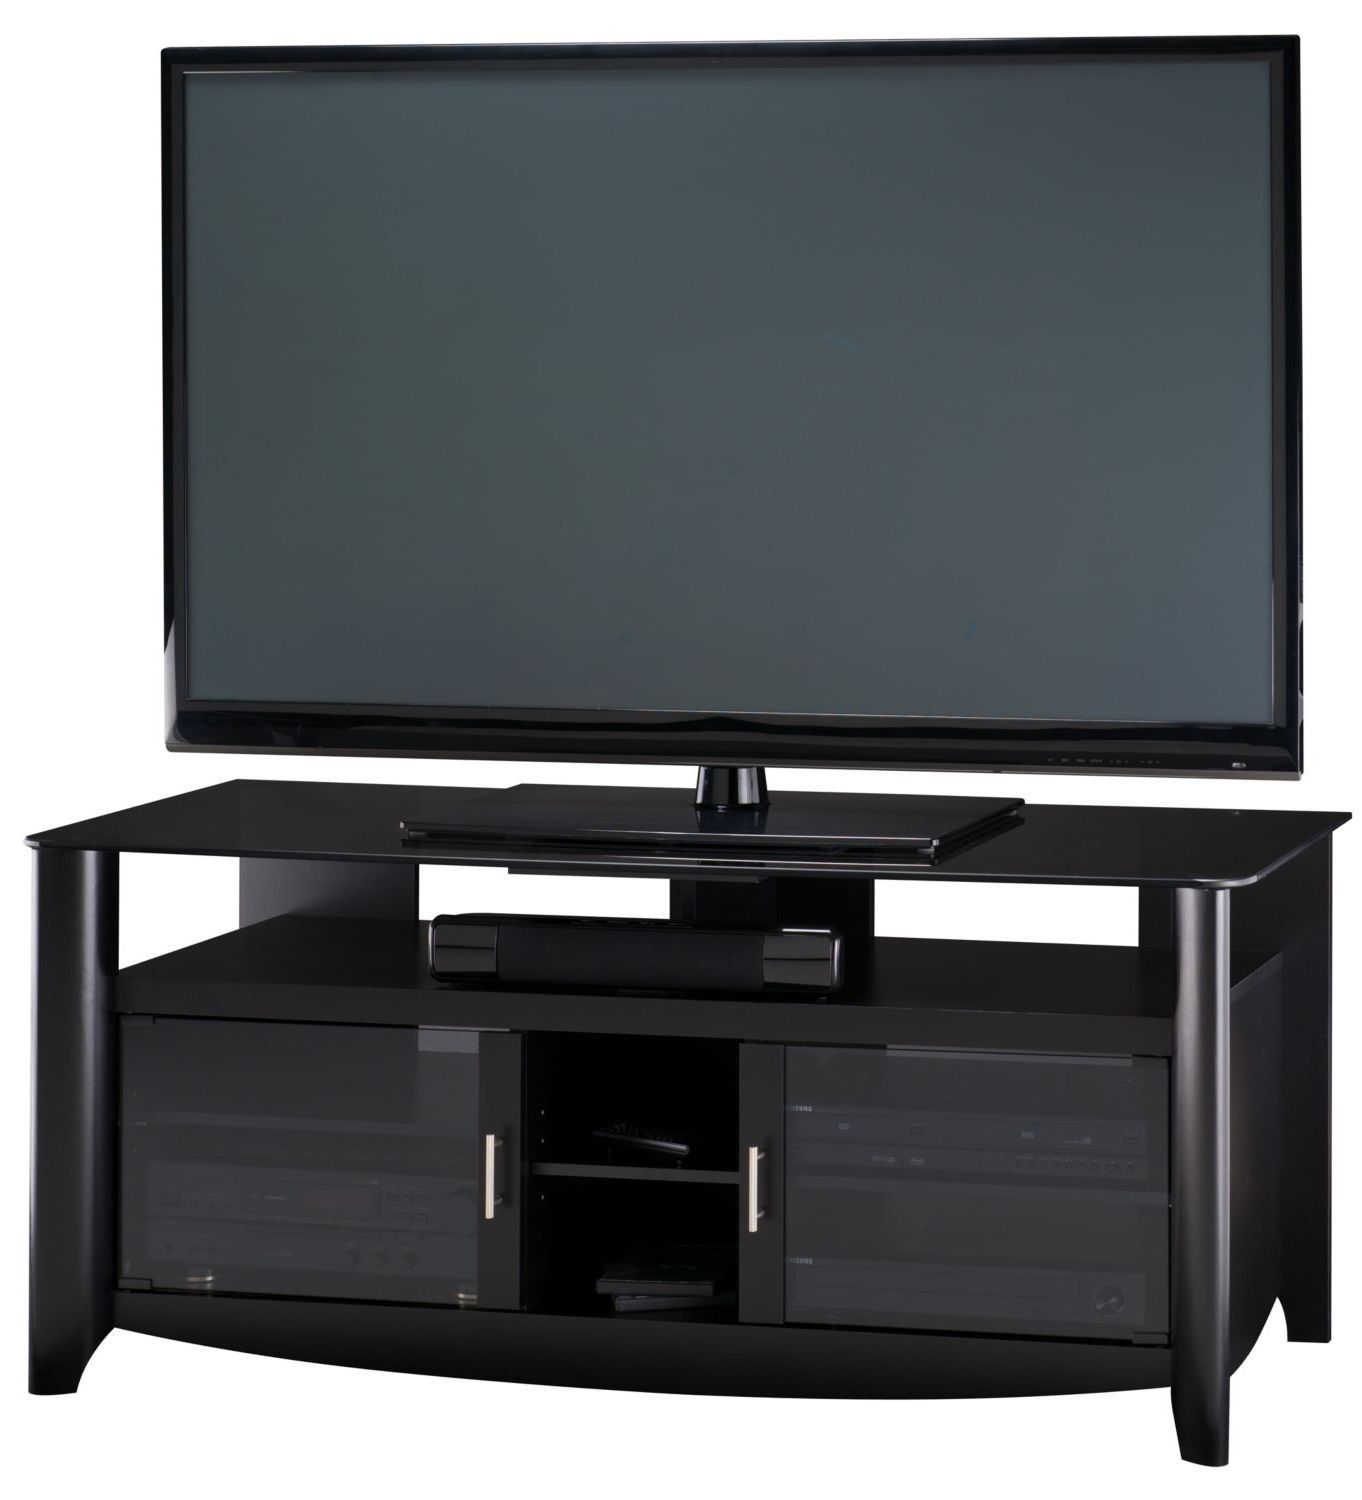 Aero Classic Black Large Tv Stand From Bush (my16960 03 Intended For Classic Tv Stands (View 14 of 15)